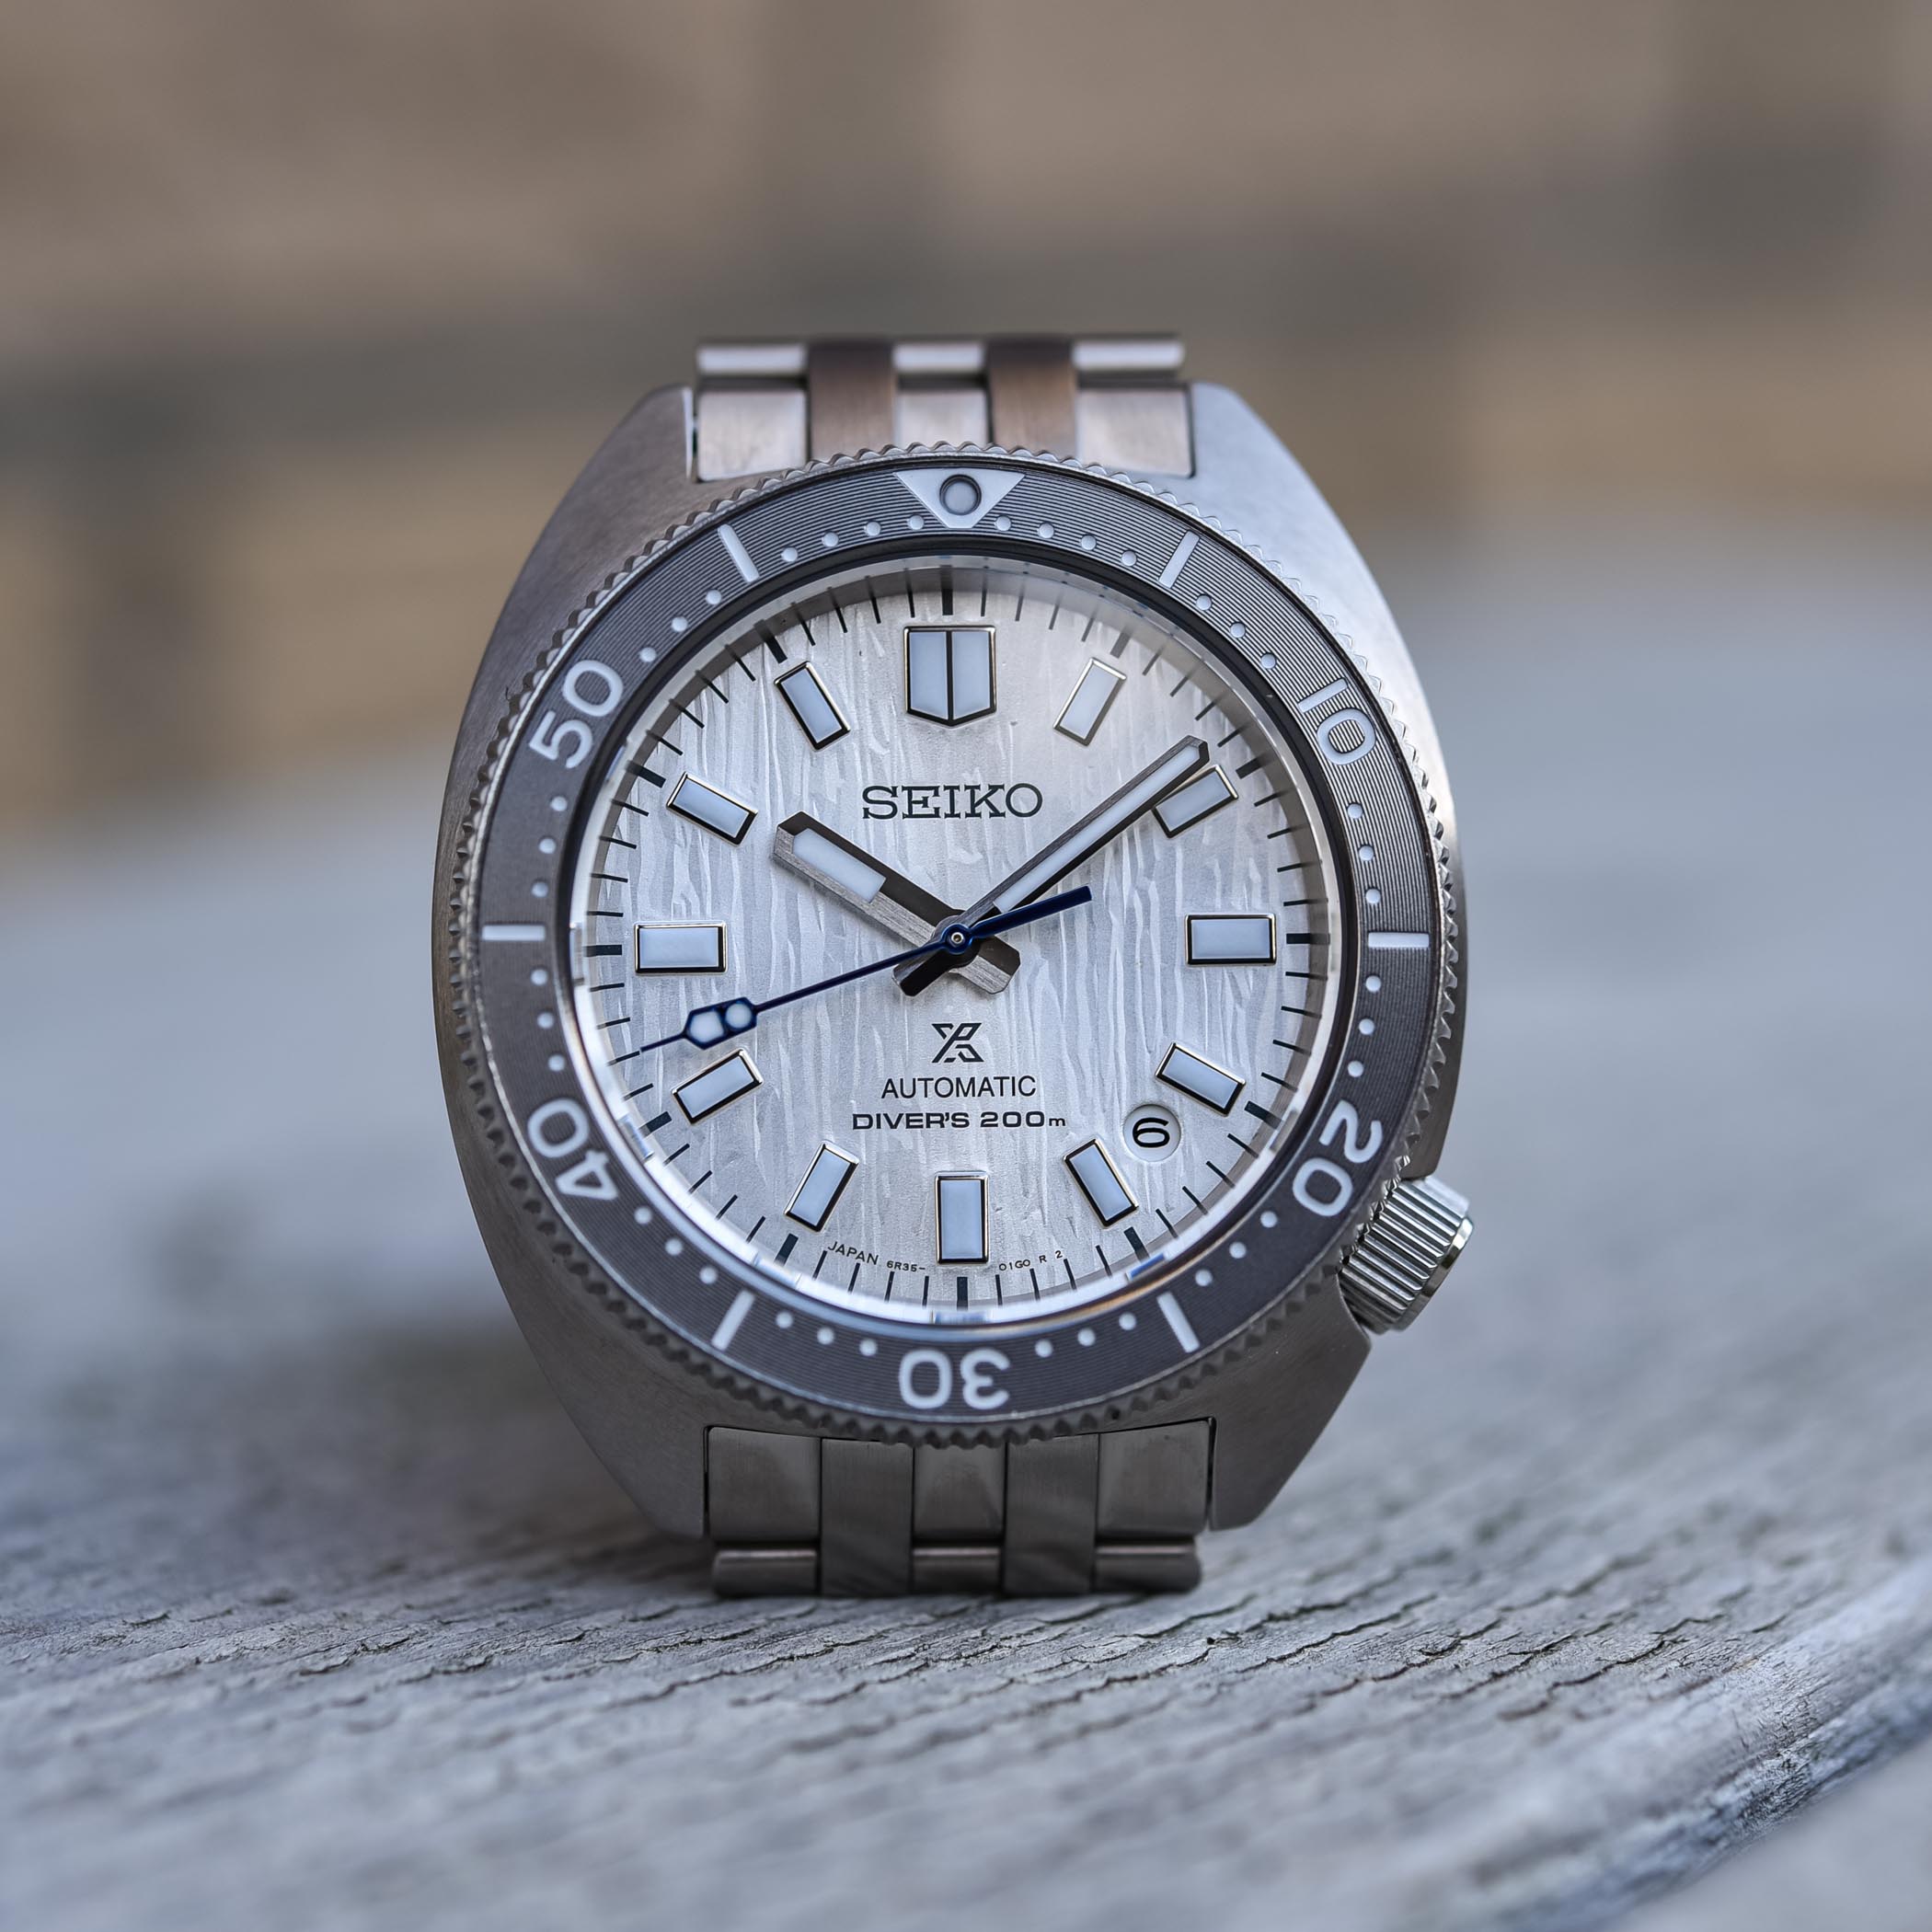 Introducing – The Seiko Prospex Save the Ocean Limited Edition SPB333 (Live  Pics & Price) - WATCHLOUNGE